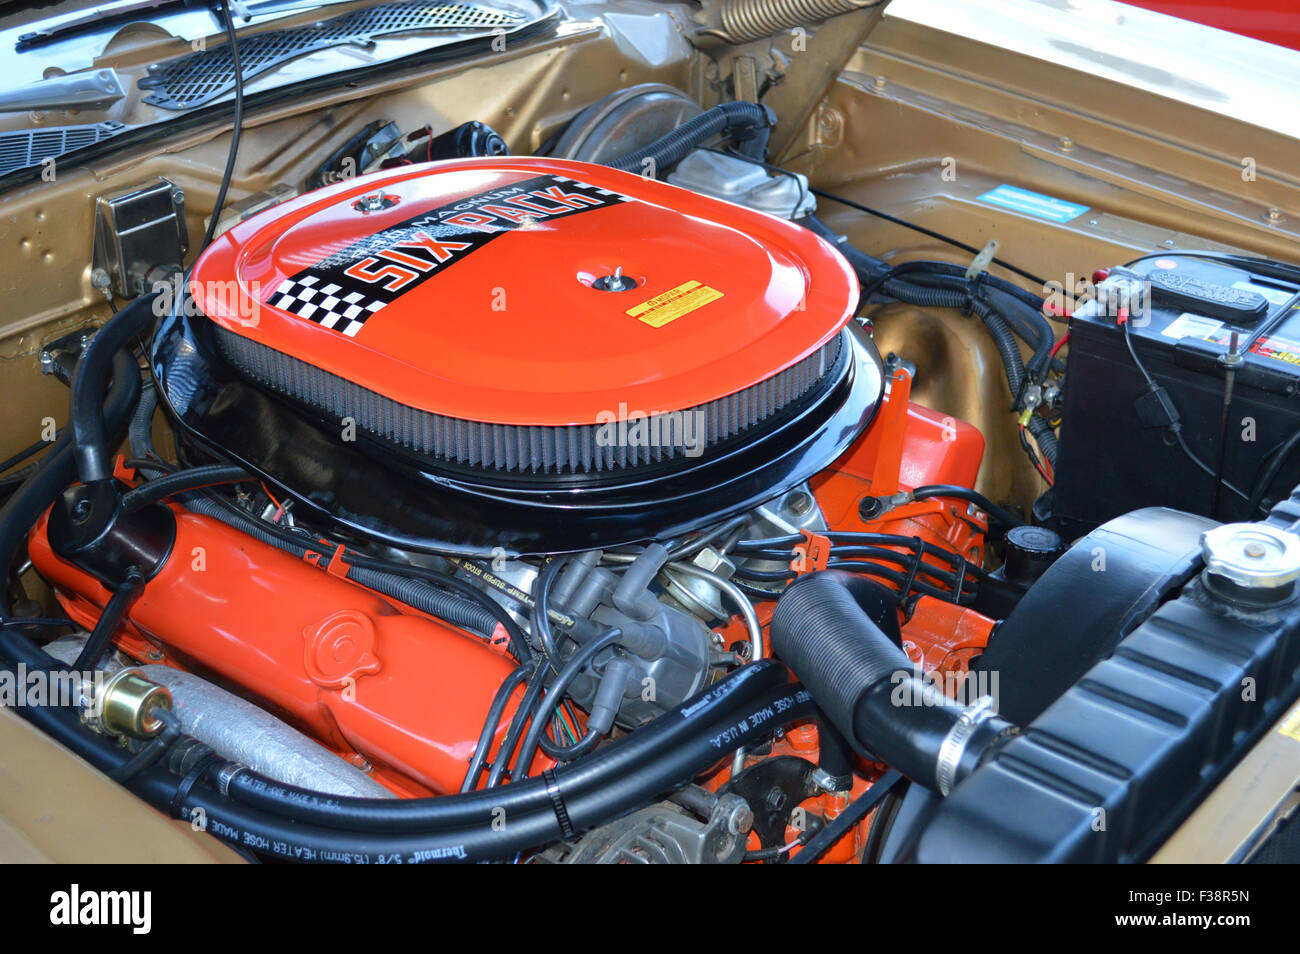 A Dodge 440 Six Pack engine on display at a car show. Stock Photo